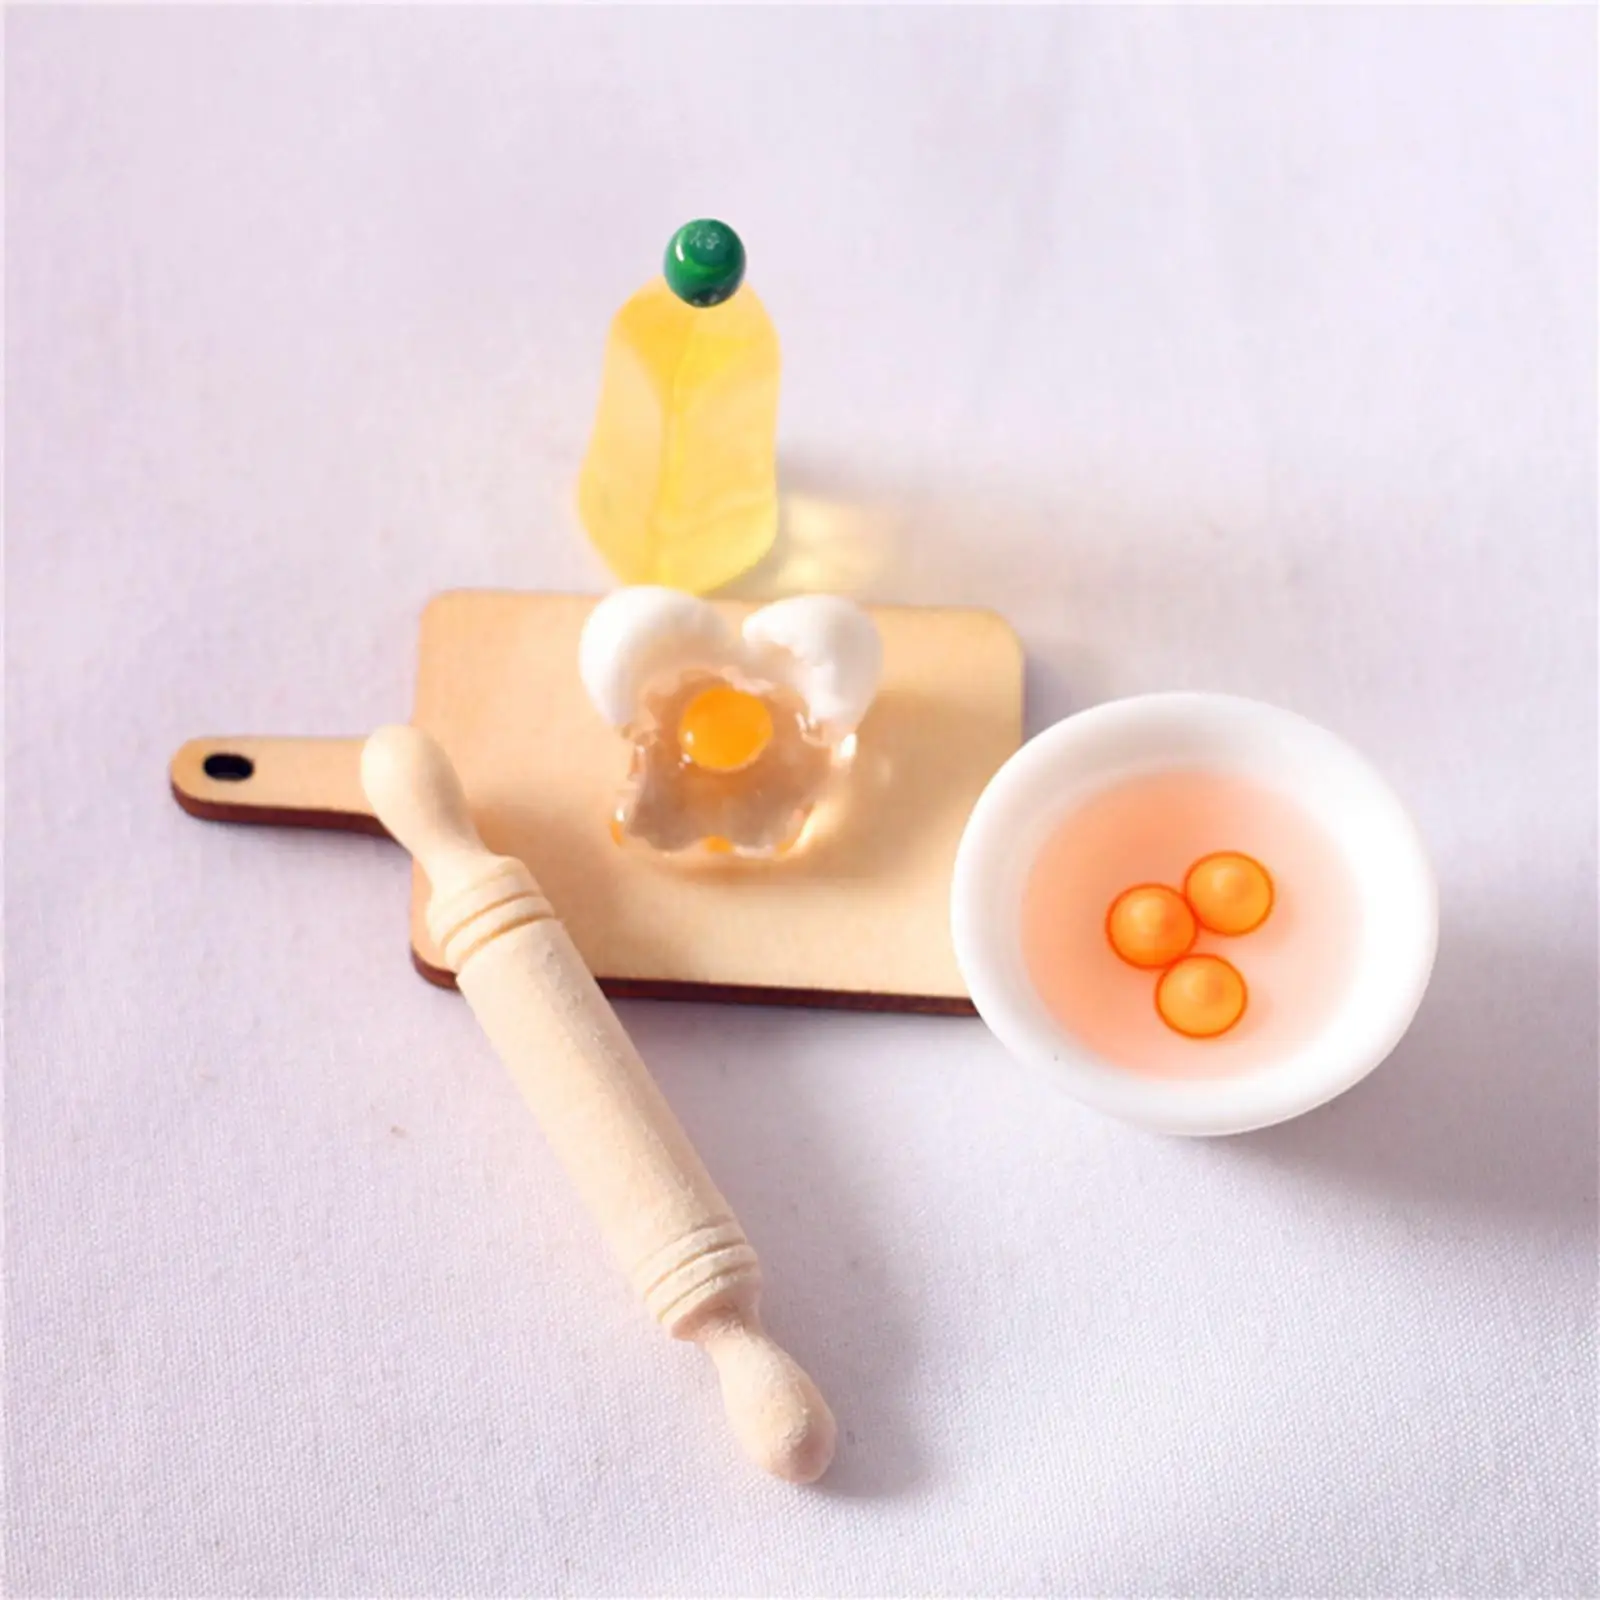 9x Cute Dollhouse Baking Set Bakery Decoration Birthday Gift Pretend Cooking Toys Simulation Chopping board Making Scene